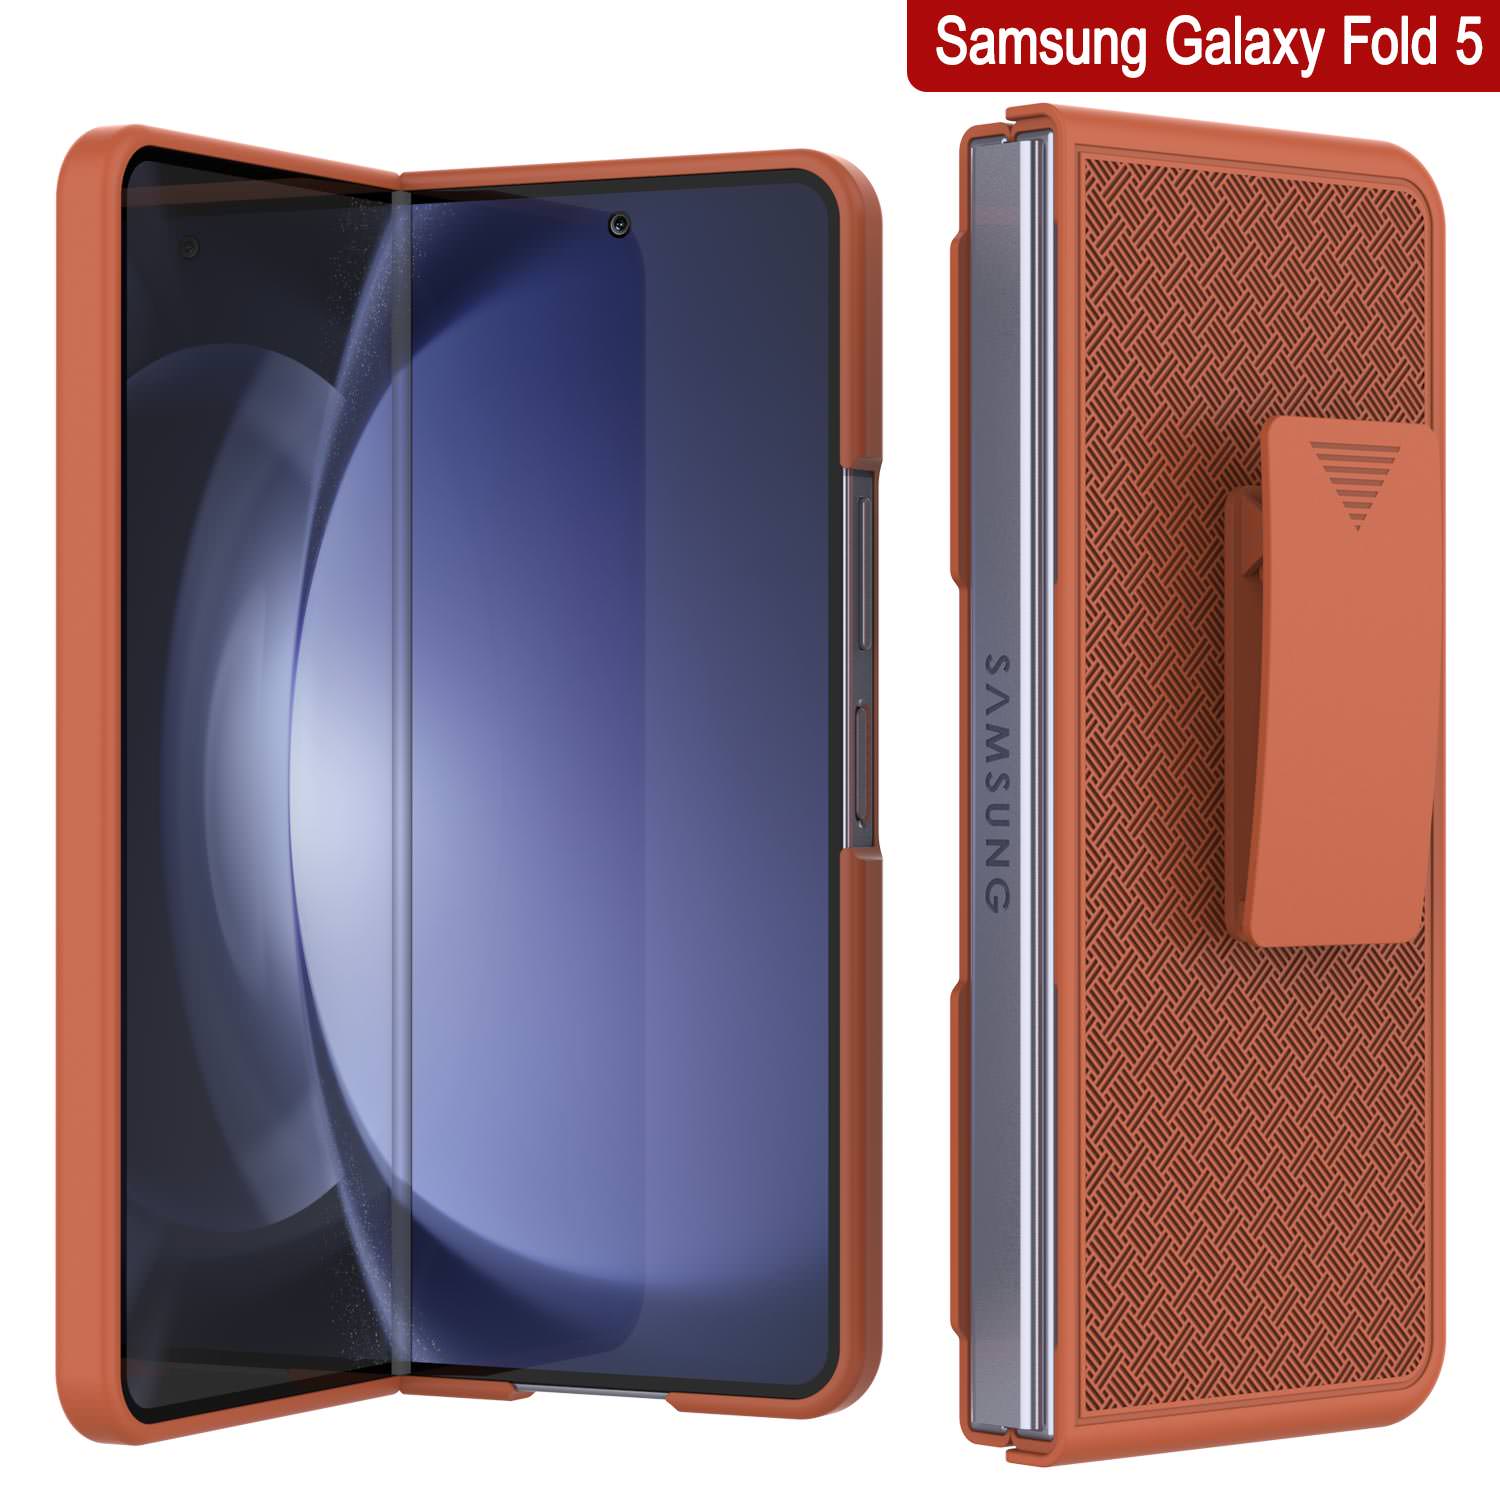 Galaxy Z Fold5 Case With Tempered Glass Screen Protector, Holster Belt Clip & Built-In Kickstand [Orange]